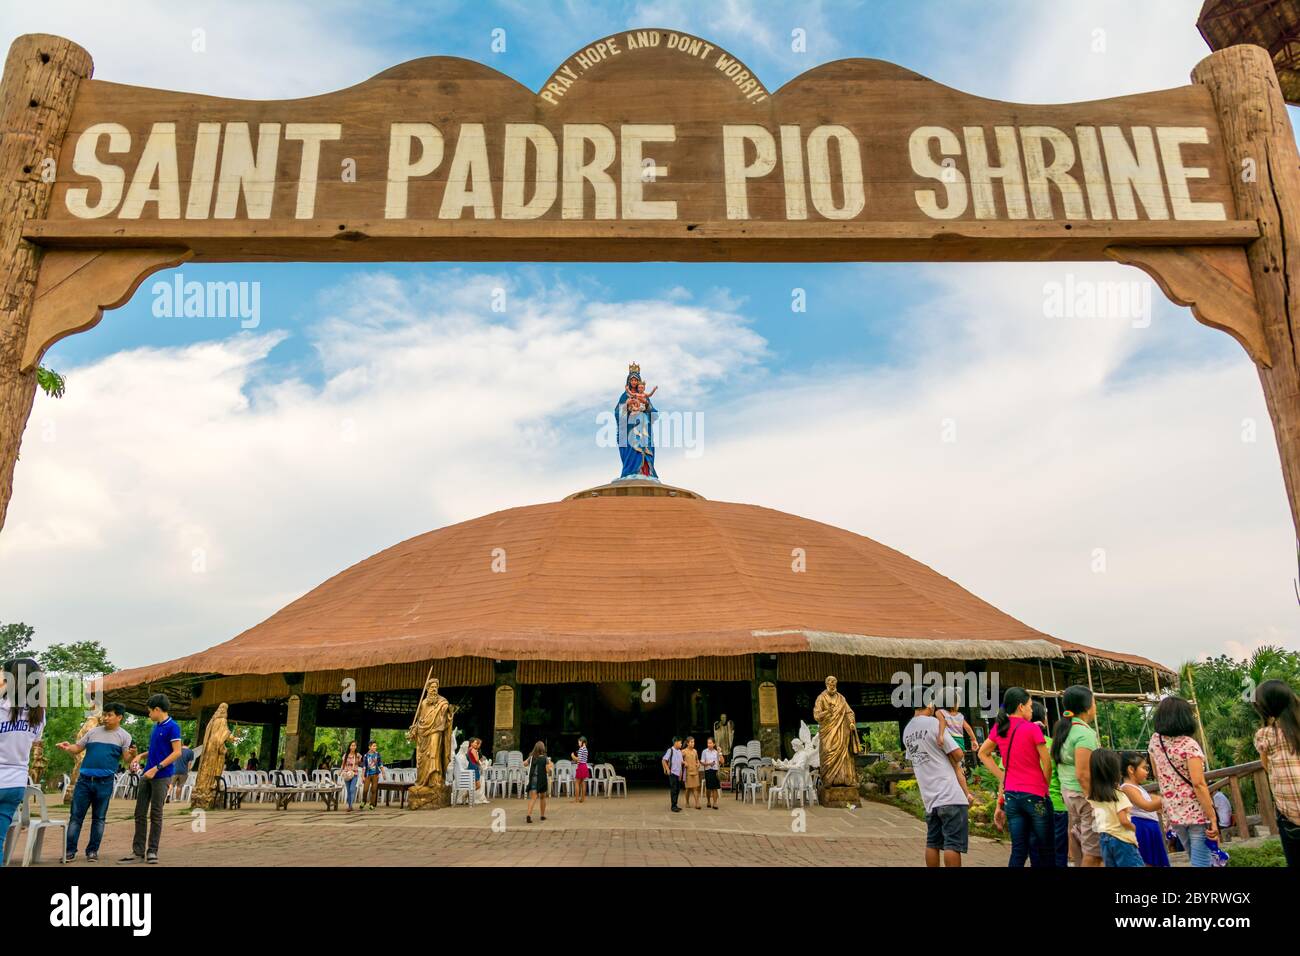 Sto. Tomas Batanga/ Philippines- 31 May 2015: Virgin Mary stats on top of the roof of Padre Pio shrine. Church goers gather in front of the church. Stock Photo